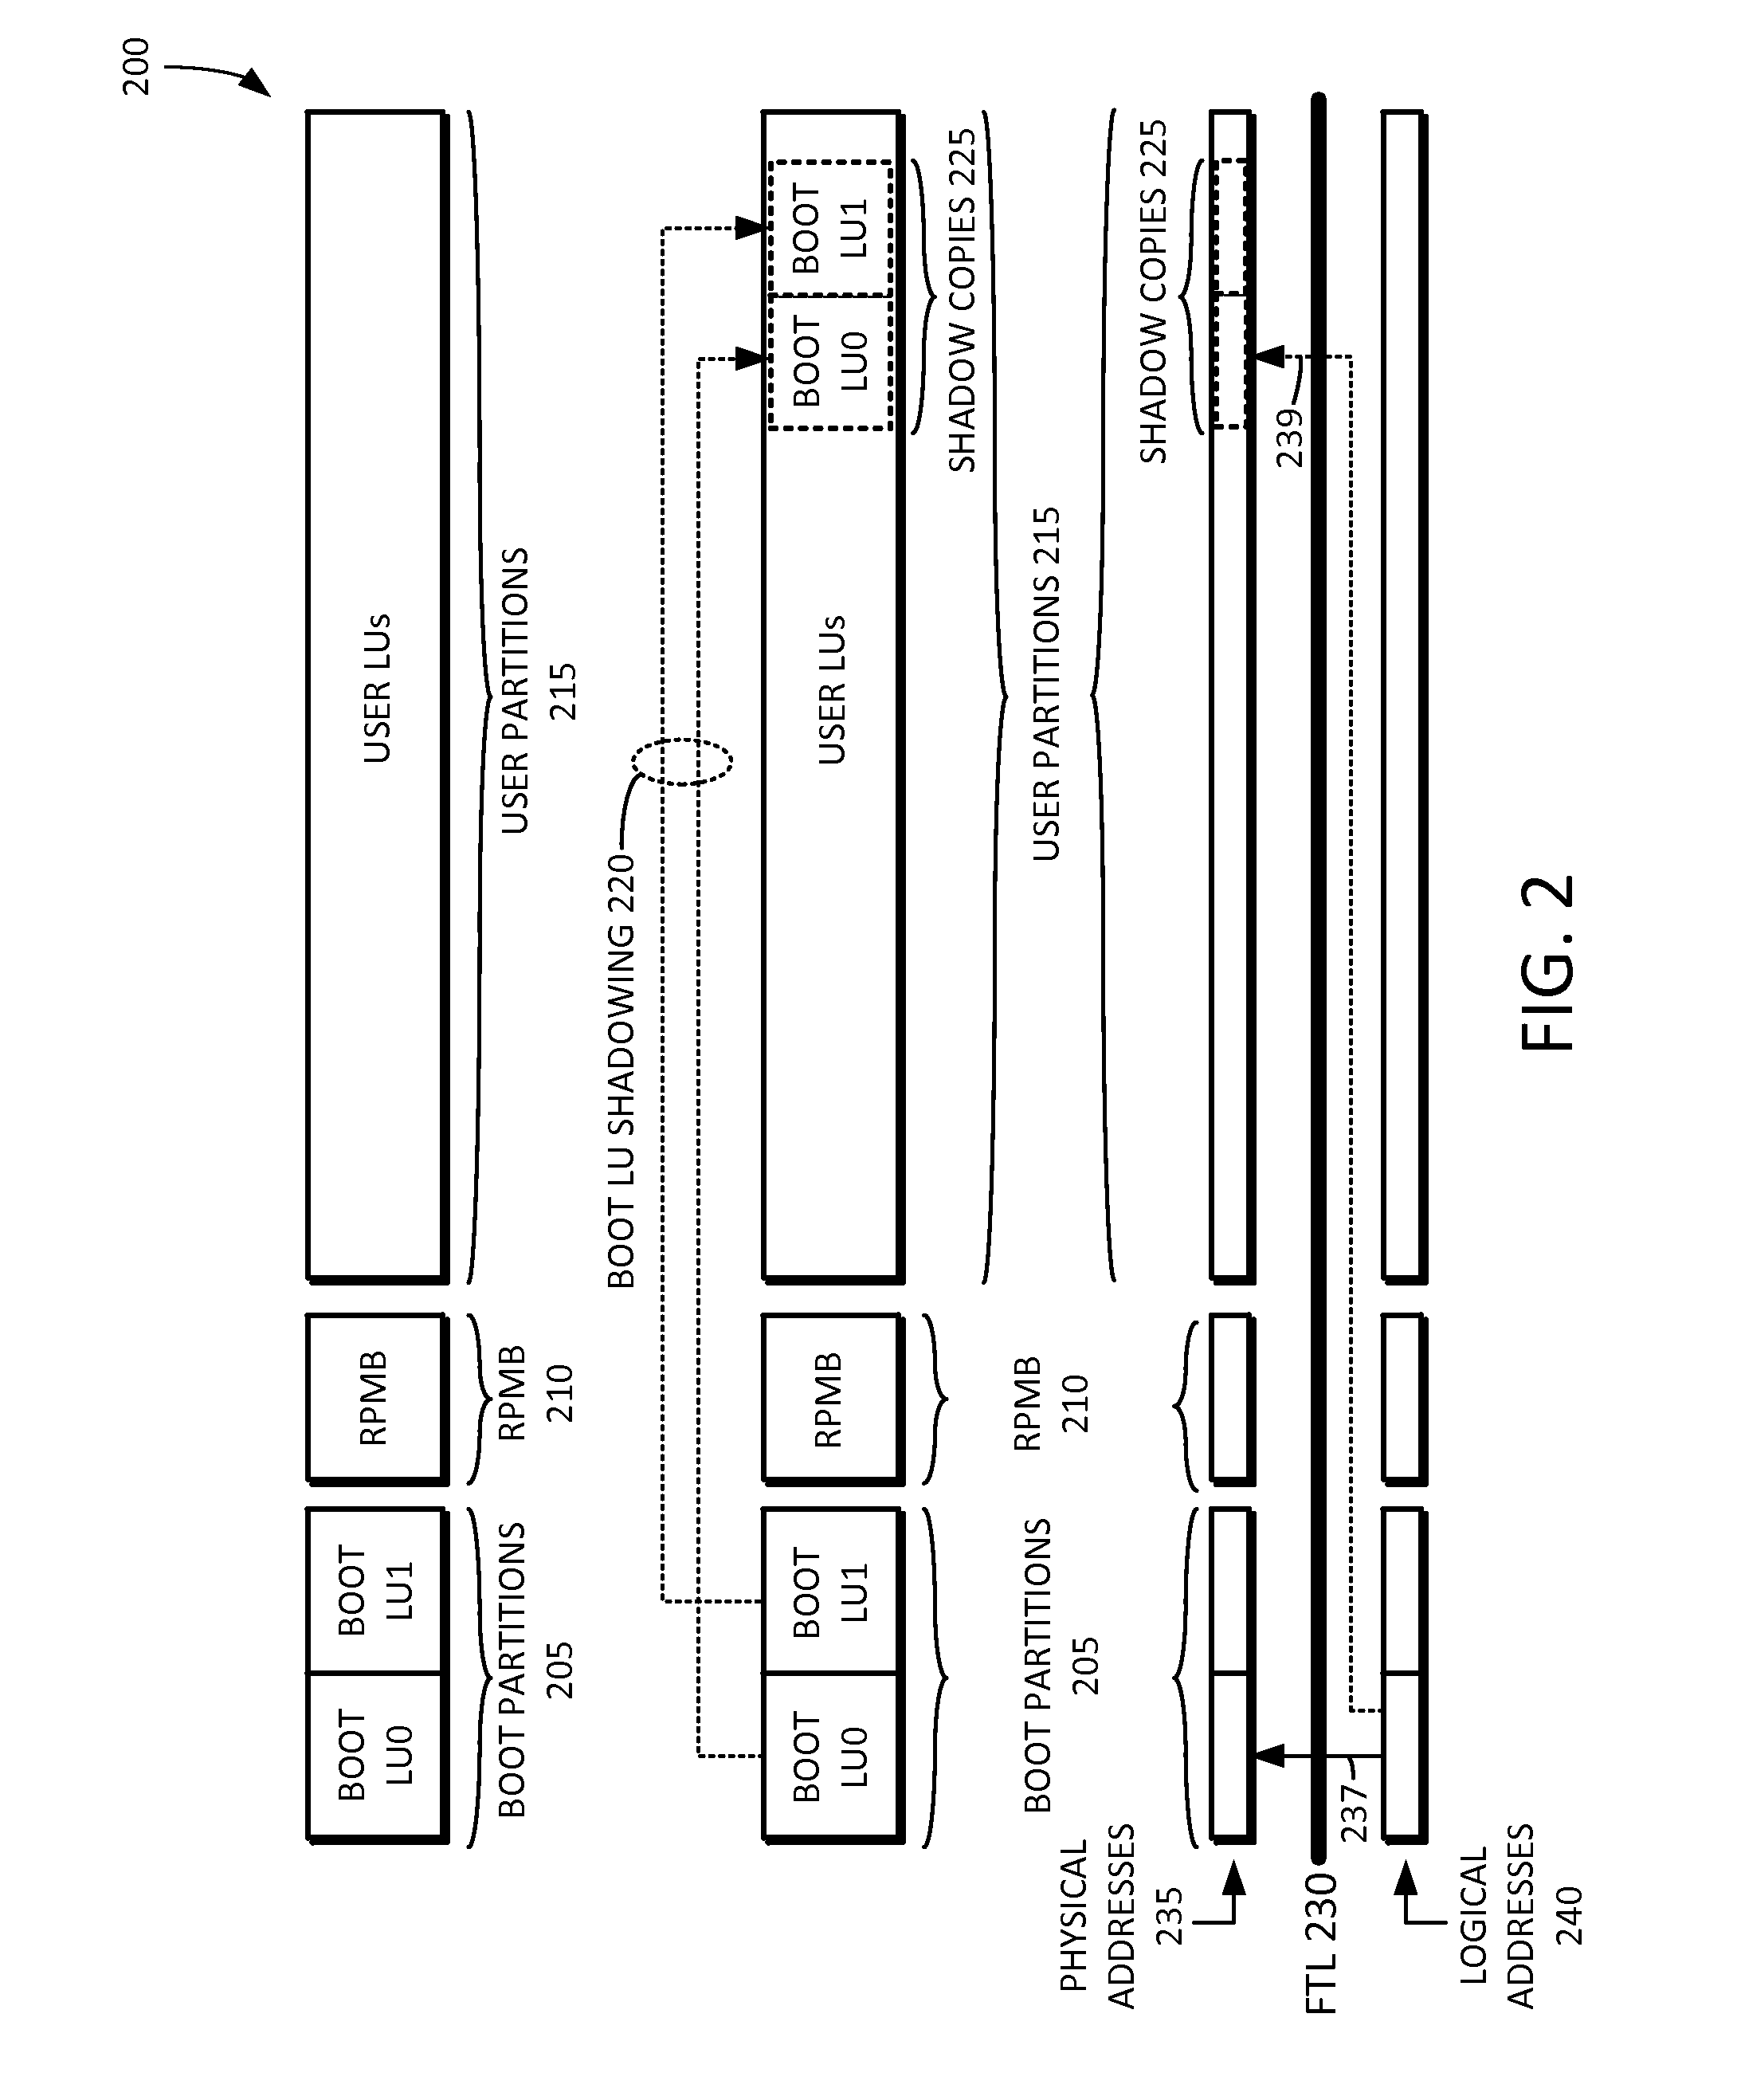 Mobile flash storage boot partition and/or logical unit shadowing